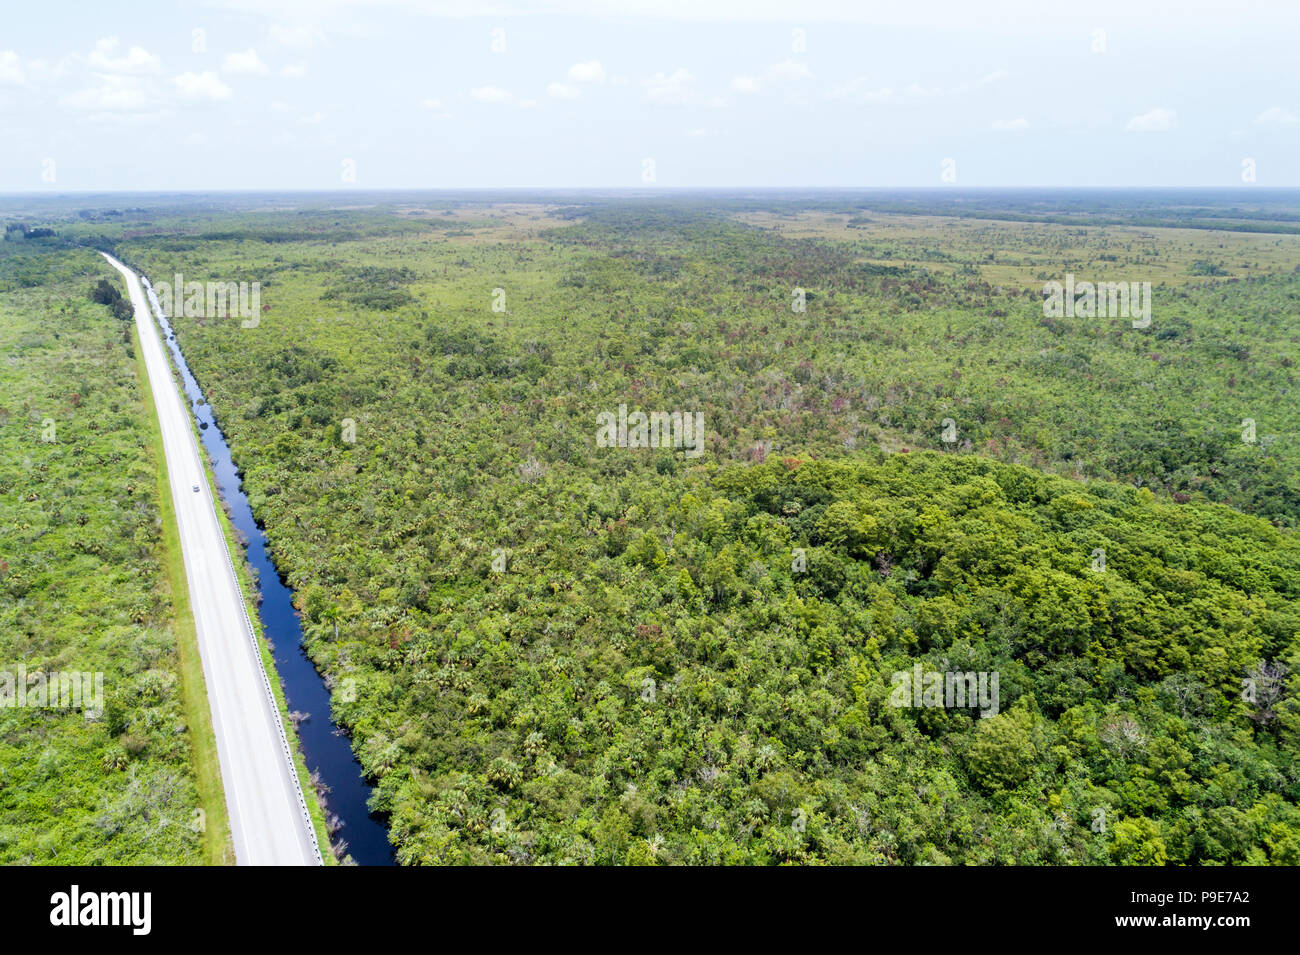 Florida,Carnestown,US Route 29 highway,Big Cypress National Preserve,canal,aerial overhead view,FL18071121d Stock Photo